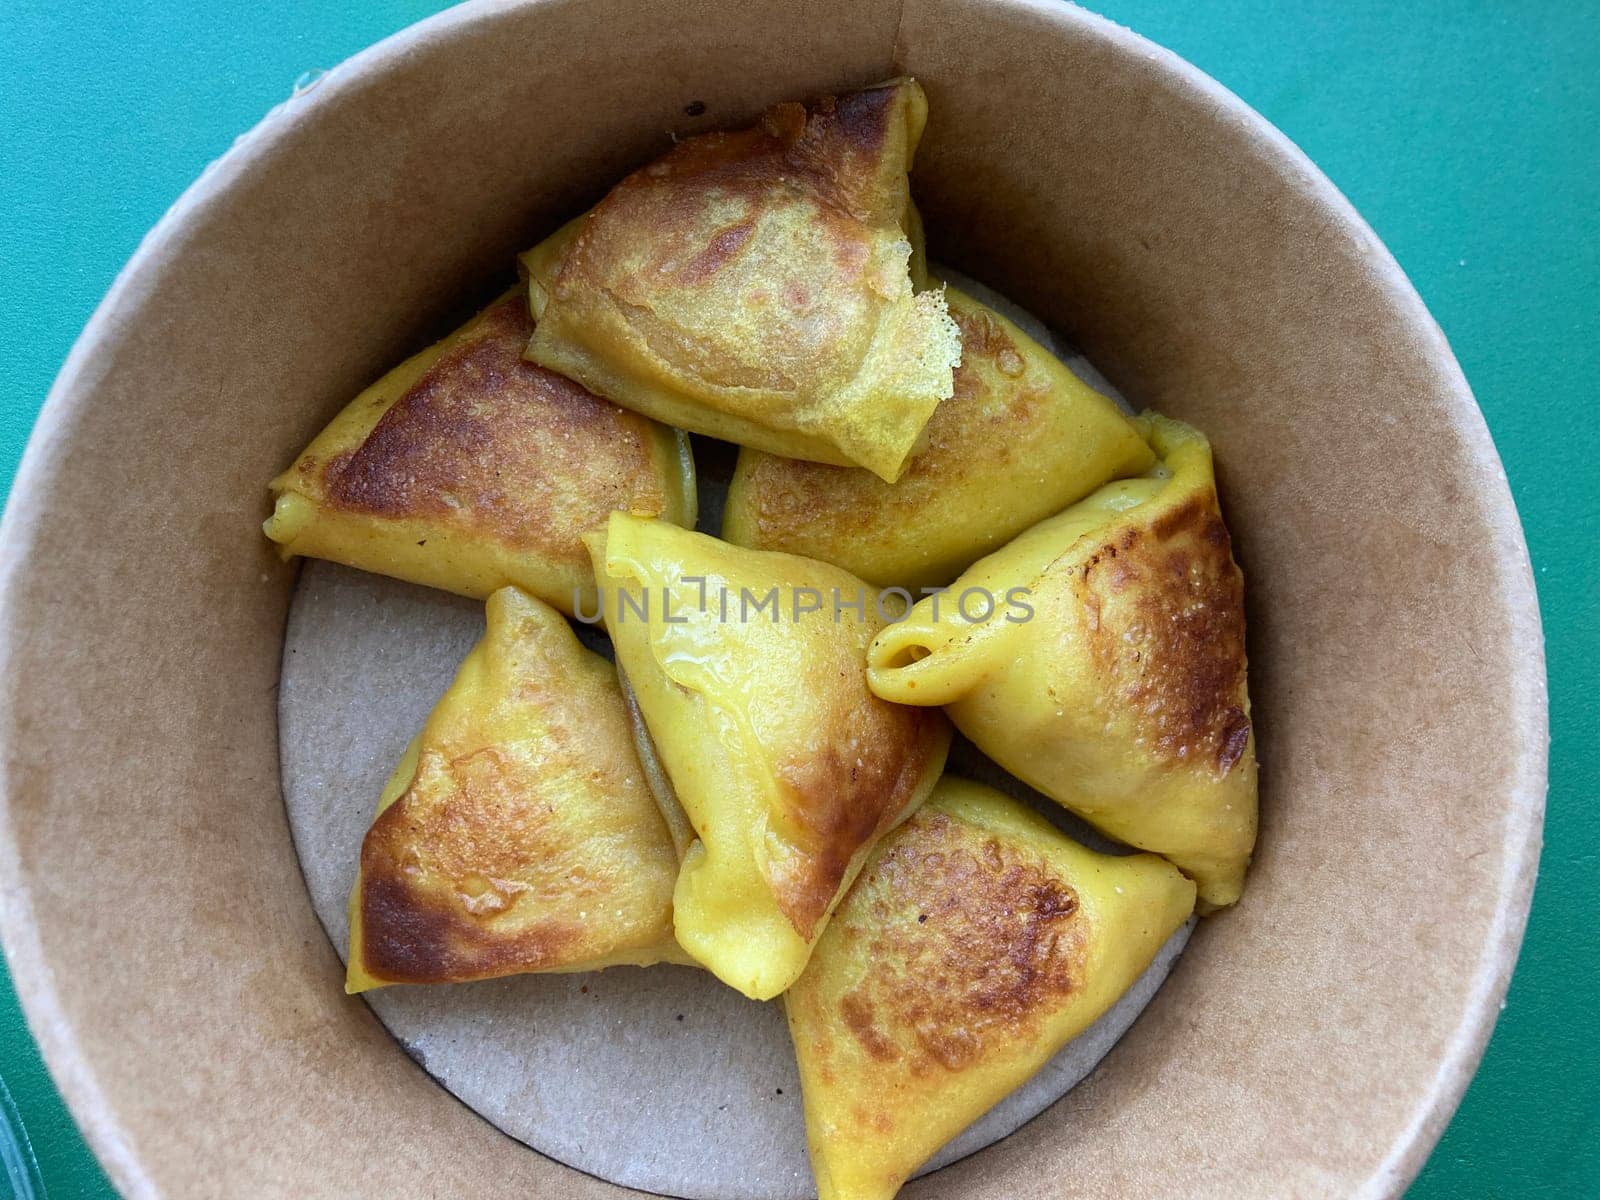 Banderiki - fried thin pancakes in a the shape of triangles